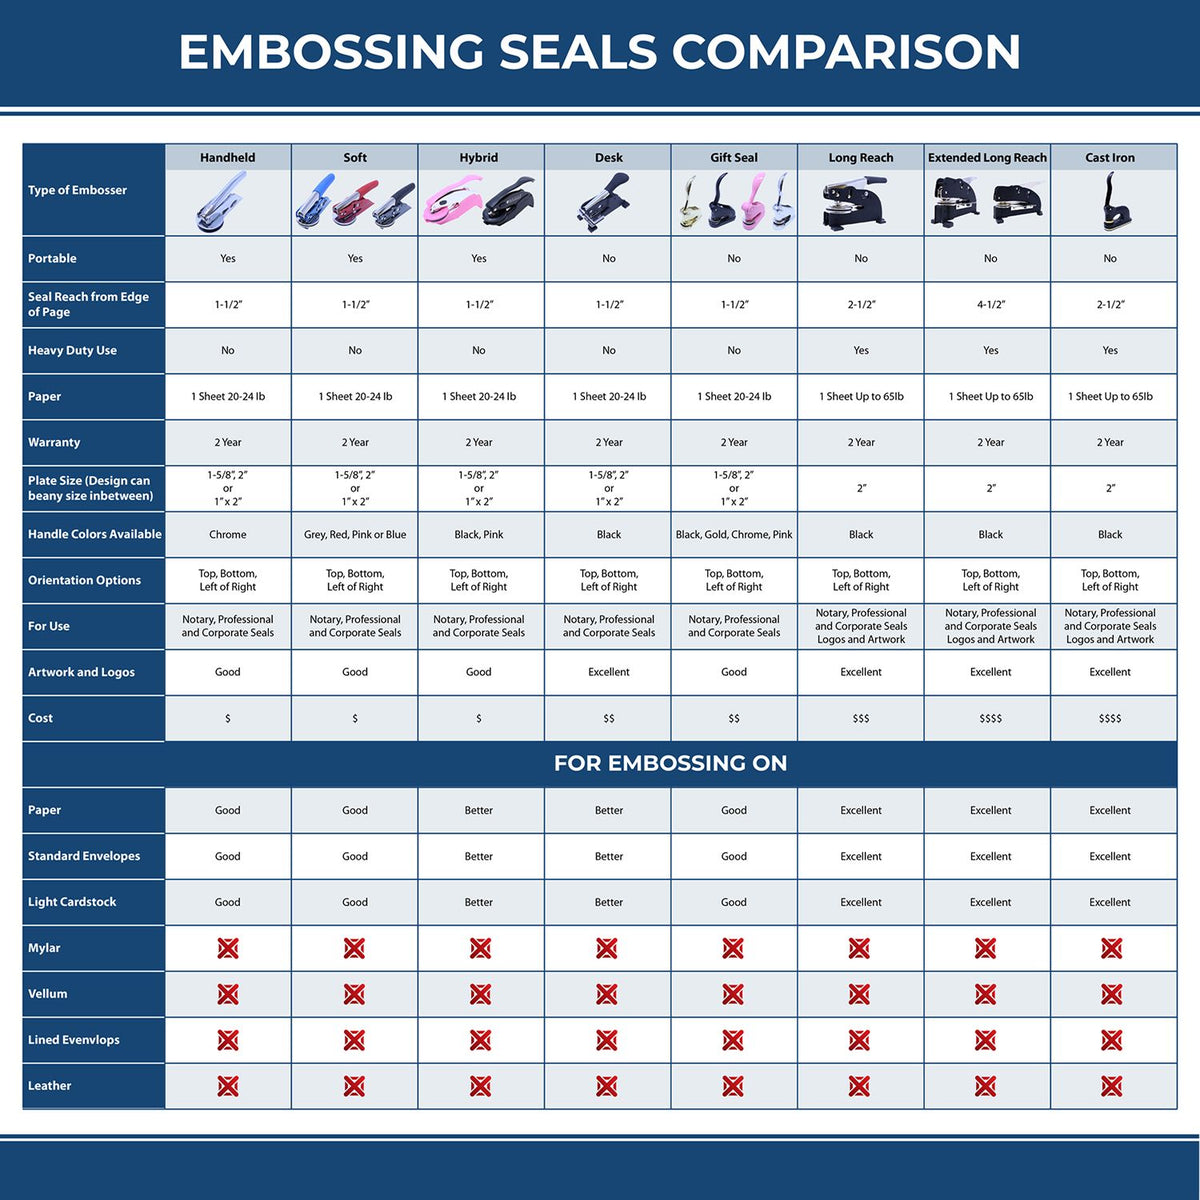 A comparison chart for the different types of mount models available for the Handheld Kansas Architect Seal Embosser.